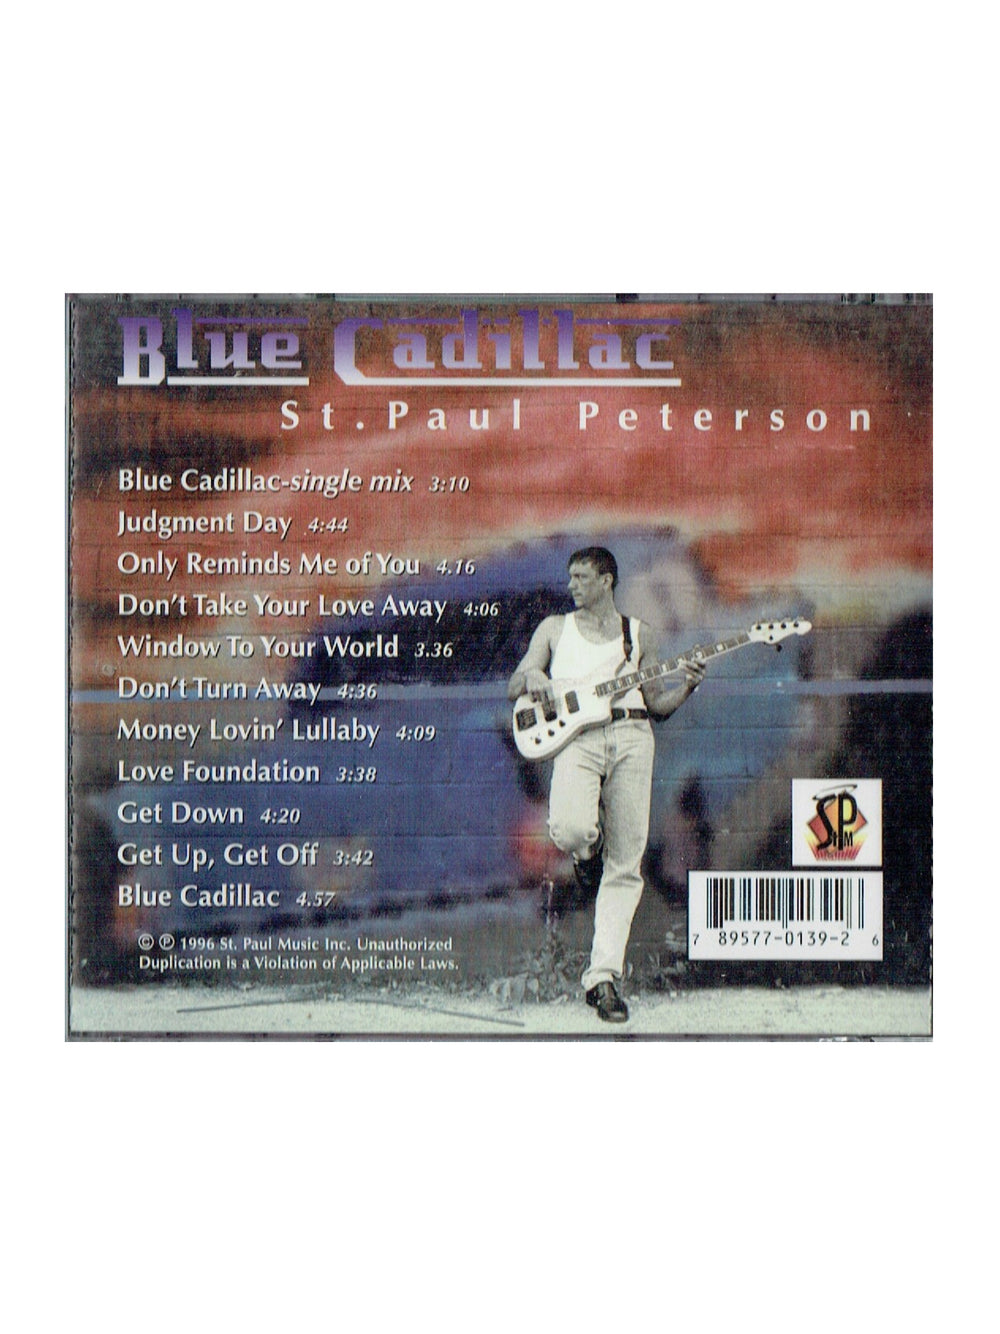 Prince – St. Paul Peterson Blue Cadillac CD Album US Preloved NM : 1996